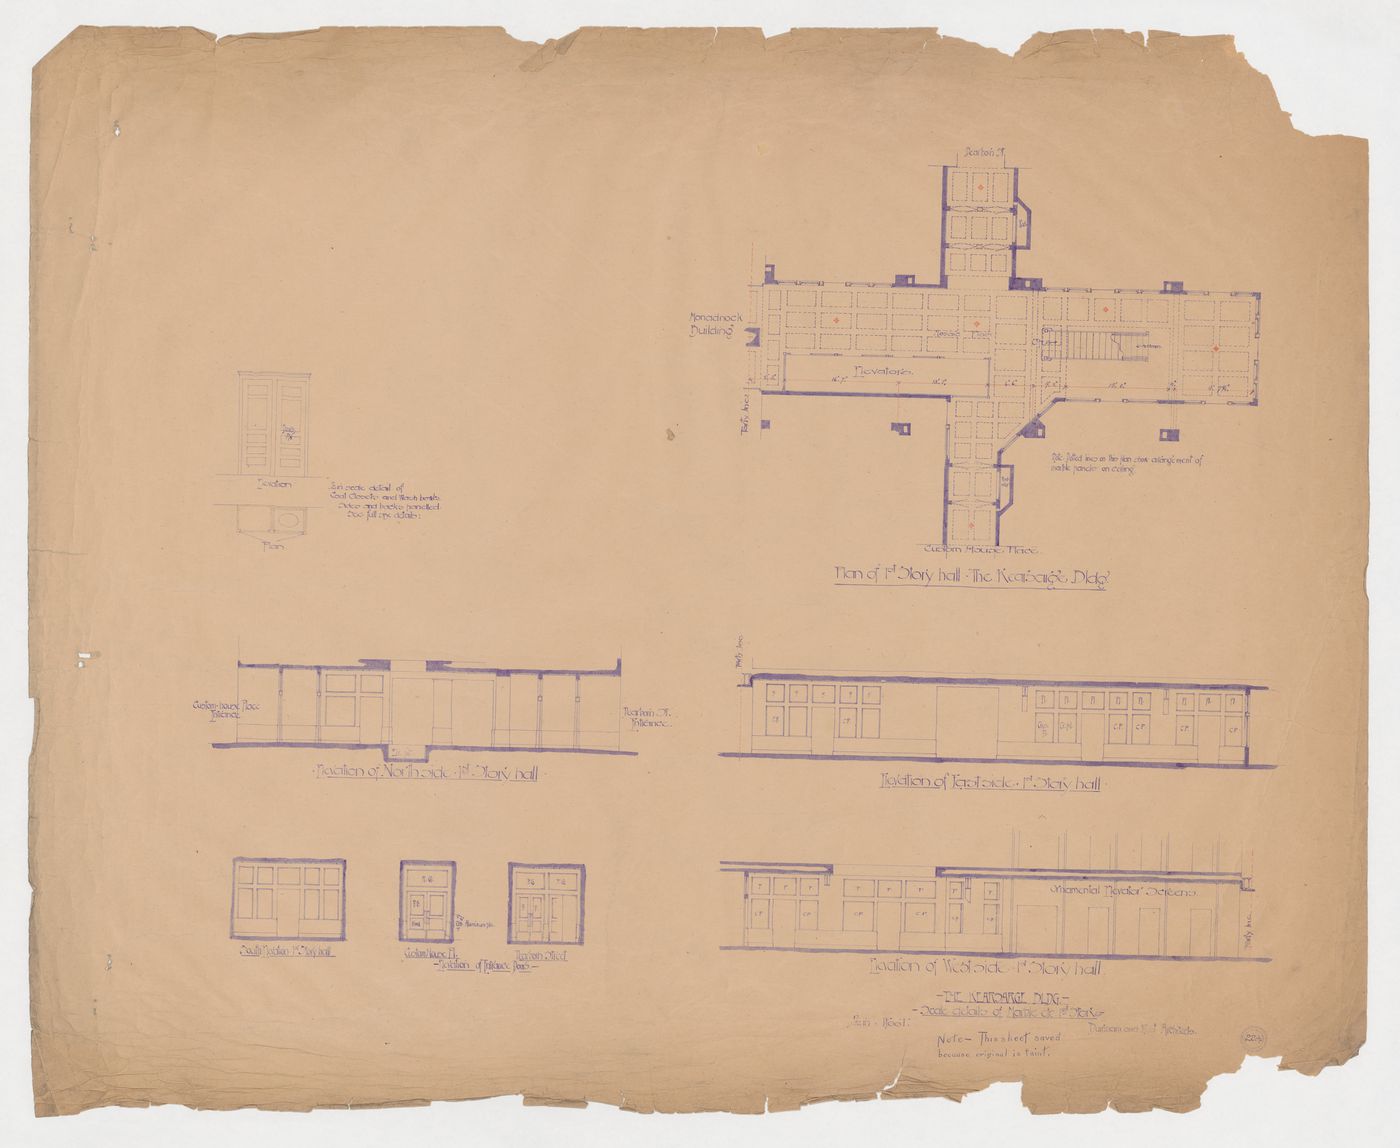 Kearsarge Building, Chicago: Elevations and plan, including ceiling tile pattern, for the first floor entrance lobbies with elevations for the entrance doors and plan and elevation for toilet cases (combined coat closet and office sink cabinet)